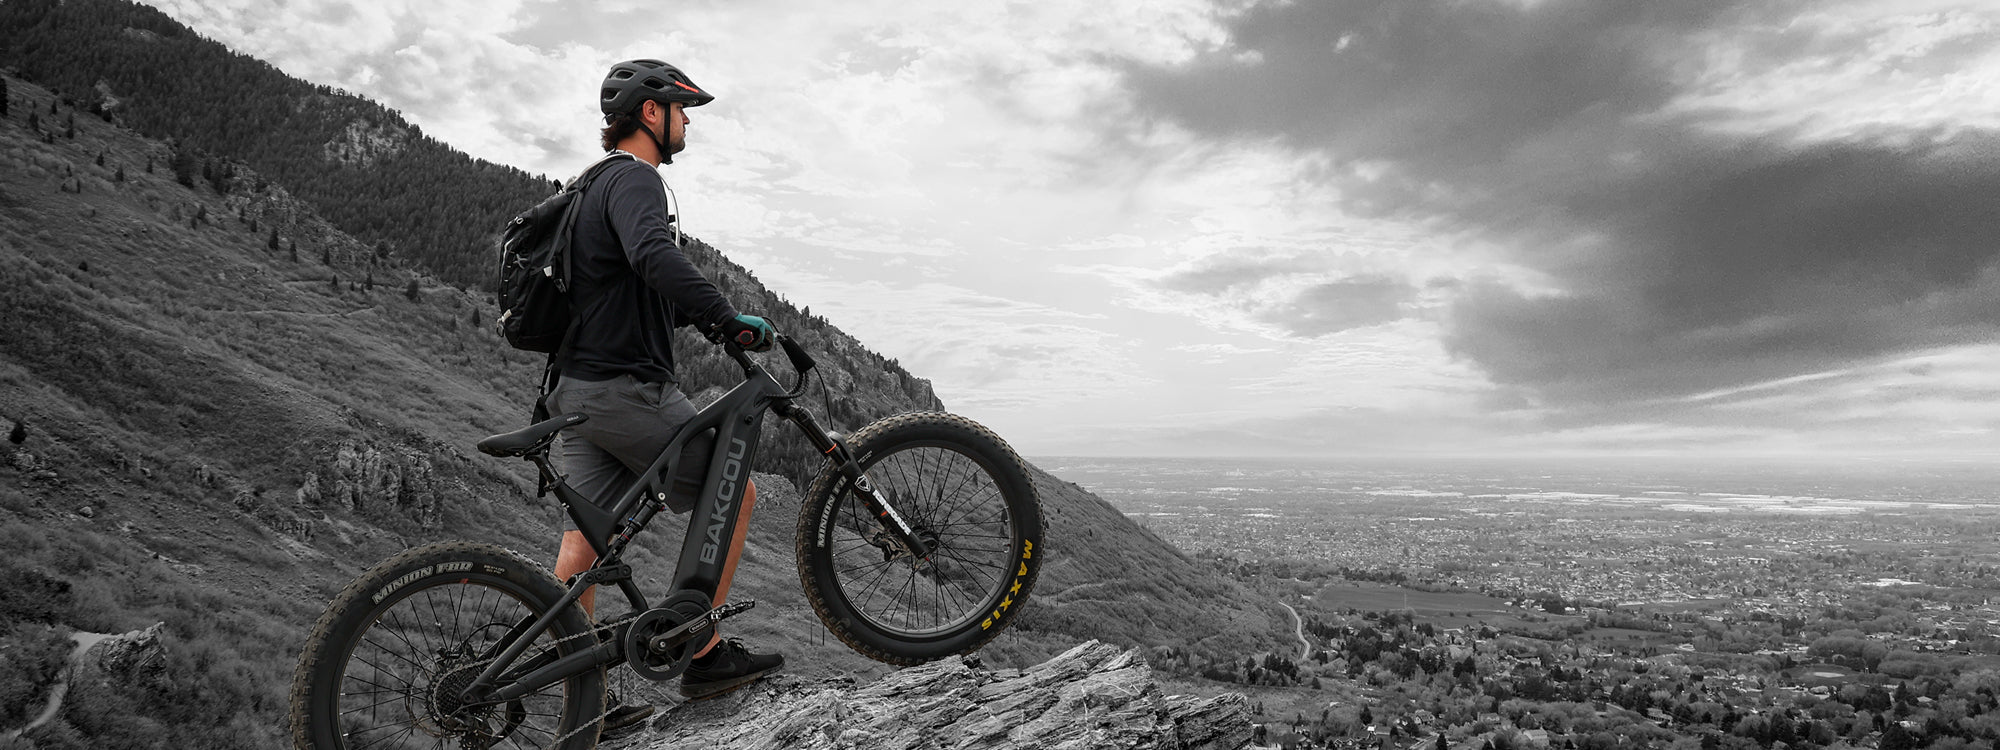 Biker overlooking a valley with his new Bakcou Scout eBike